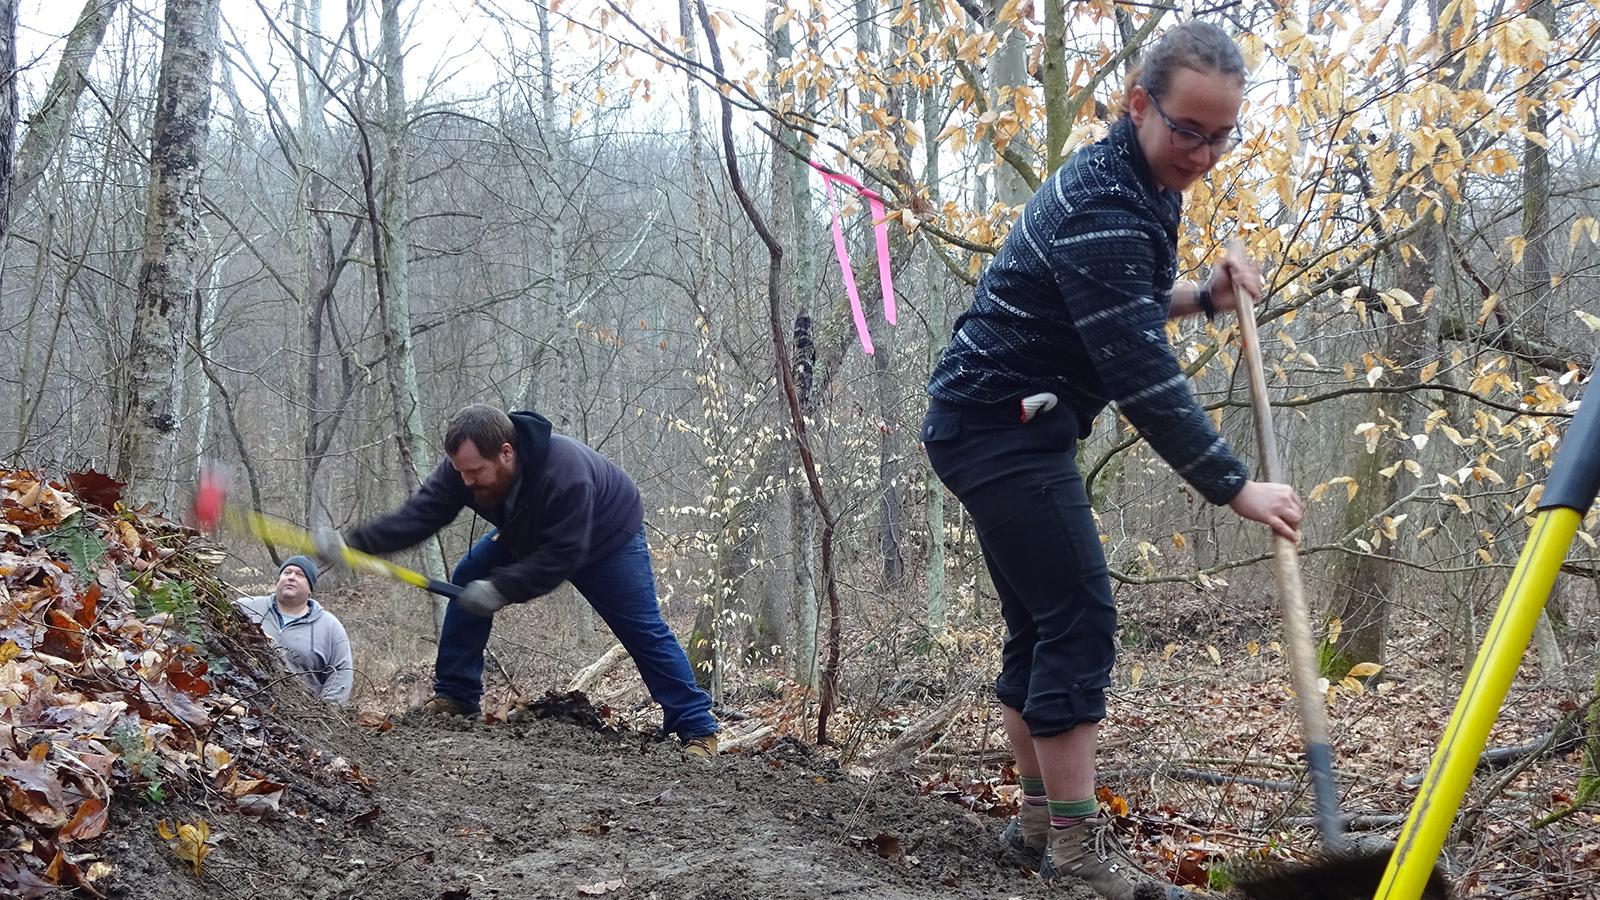 BTA workers George Blankenhorn and Charles Gordon work with OFS student Hannah Griswold on the Buckeye Trail. 